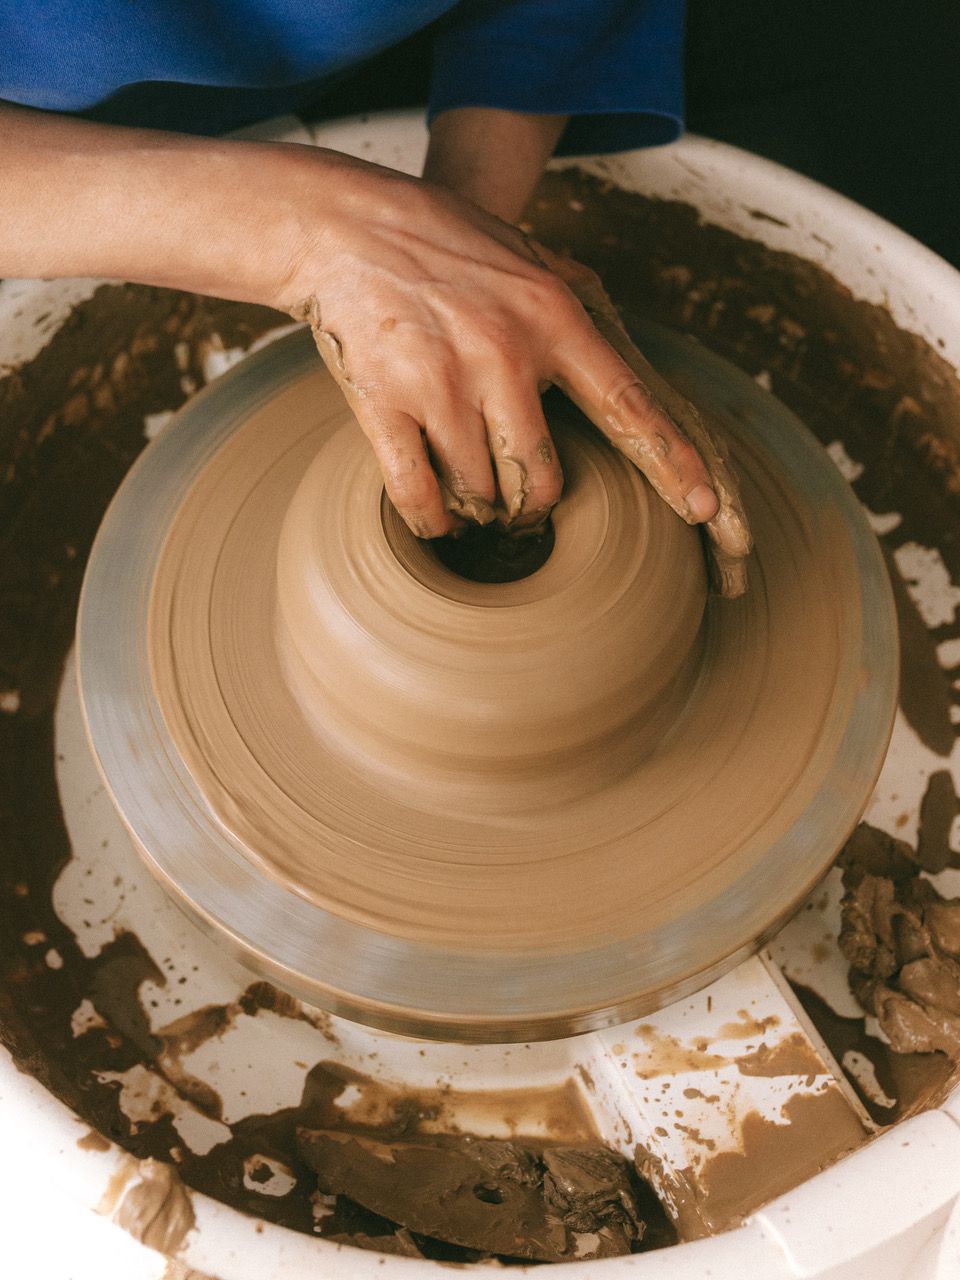 On the meditative effects of pottery